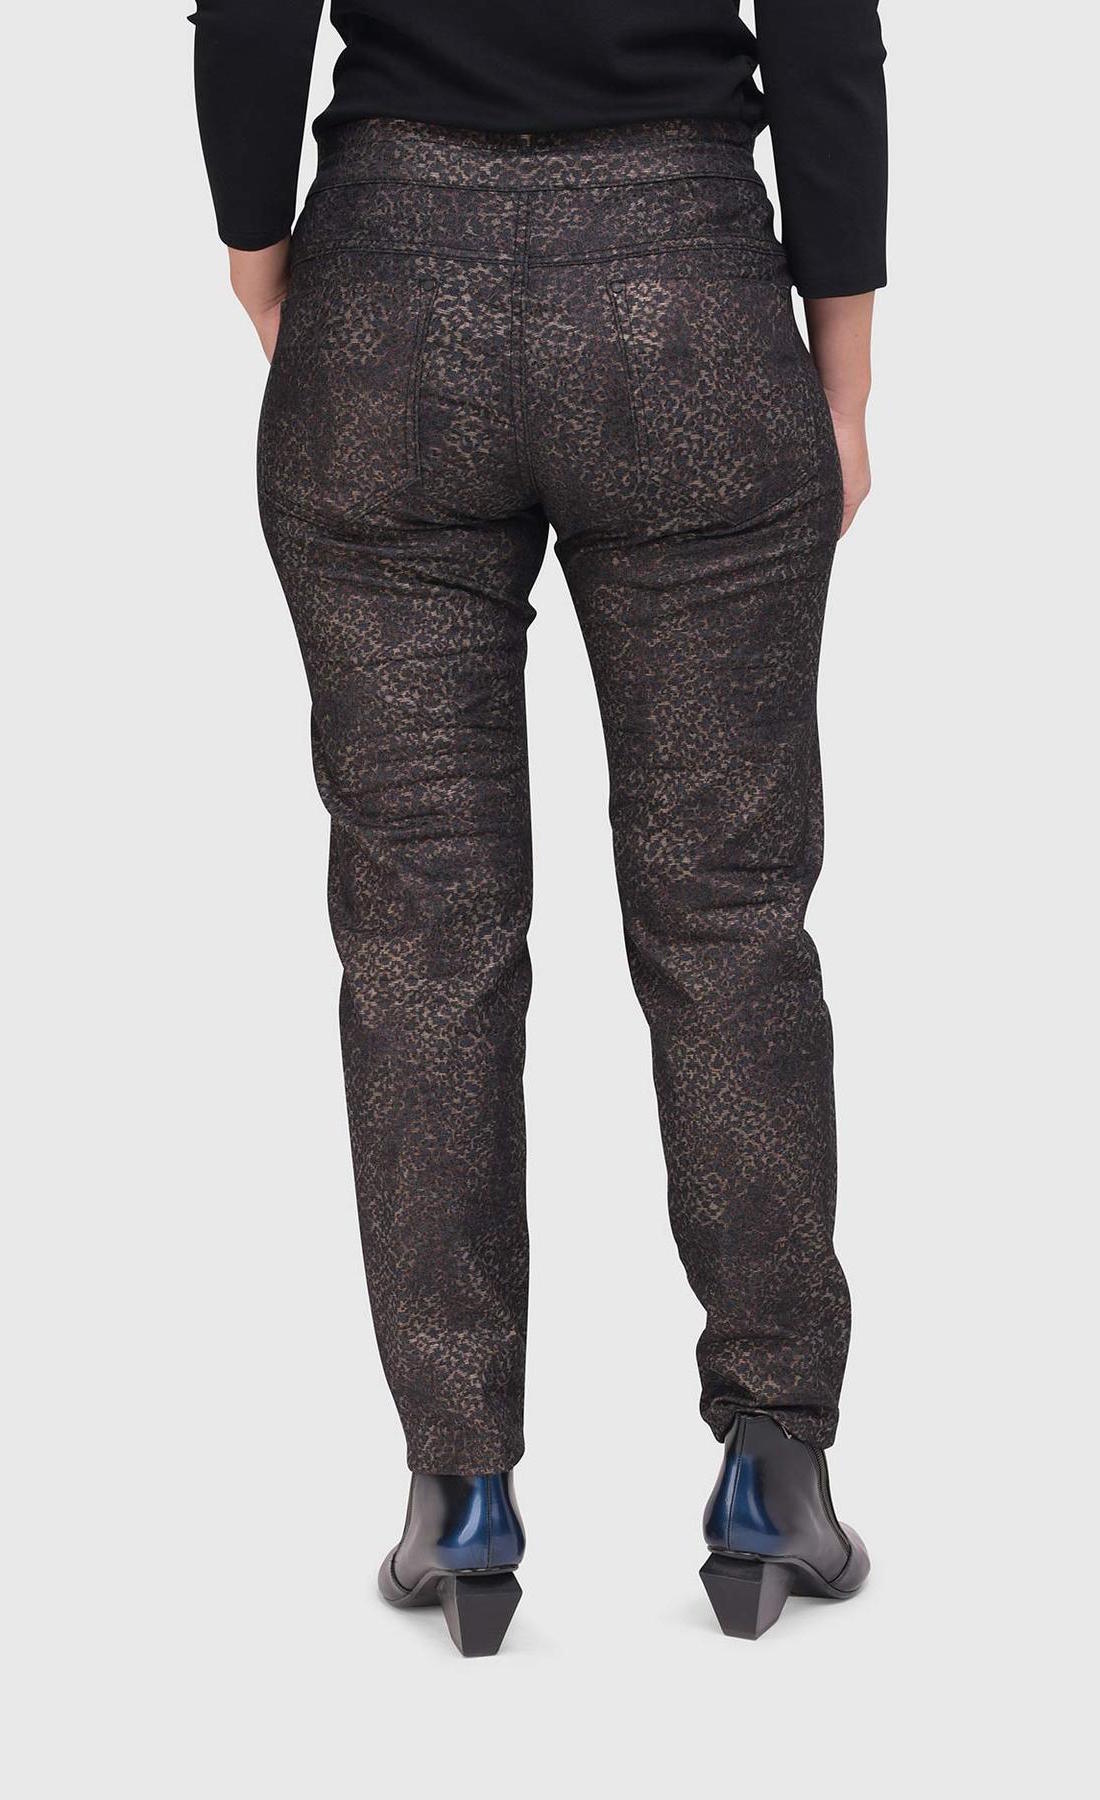 Bottom half back view of a woman wearing the alembika iconic stretch pant in the color sepia. The pant is dark brown/black with a small metallic-like animal print. It also has two back pockets.